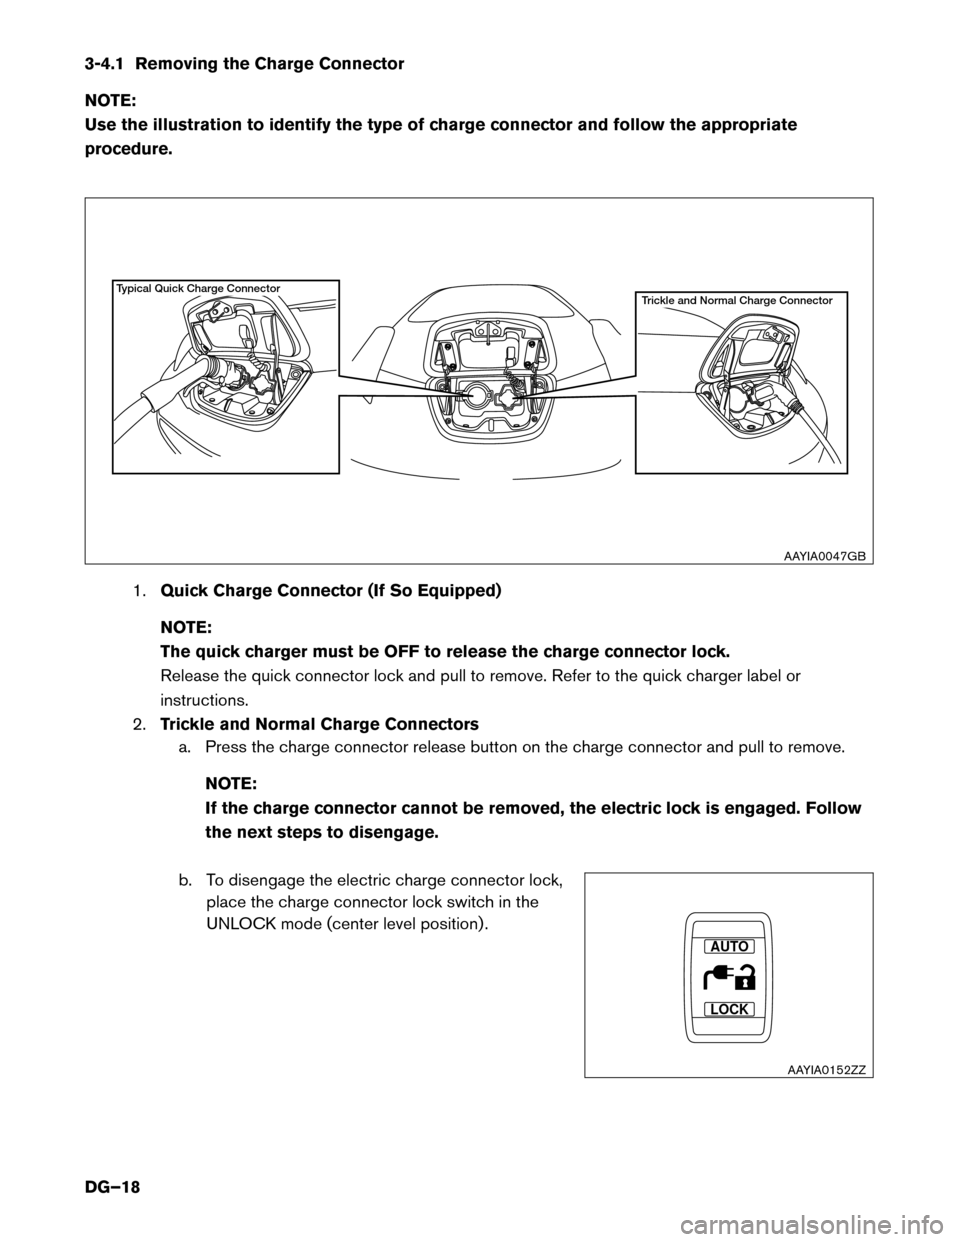 NISSAN LEAF 2015 1.G Dismantling Guide 3-4.1 Removing the Charge Connector
NO
TE:
Use the illustration to identify the type of charge connector and follow the appropriate
procedure.
1.Quick Charge Connector (If So Equipped)
NOTE:
The quick